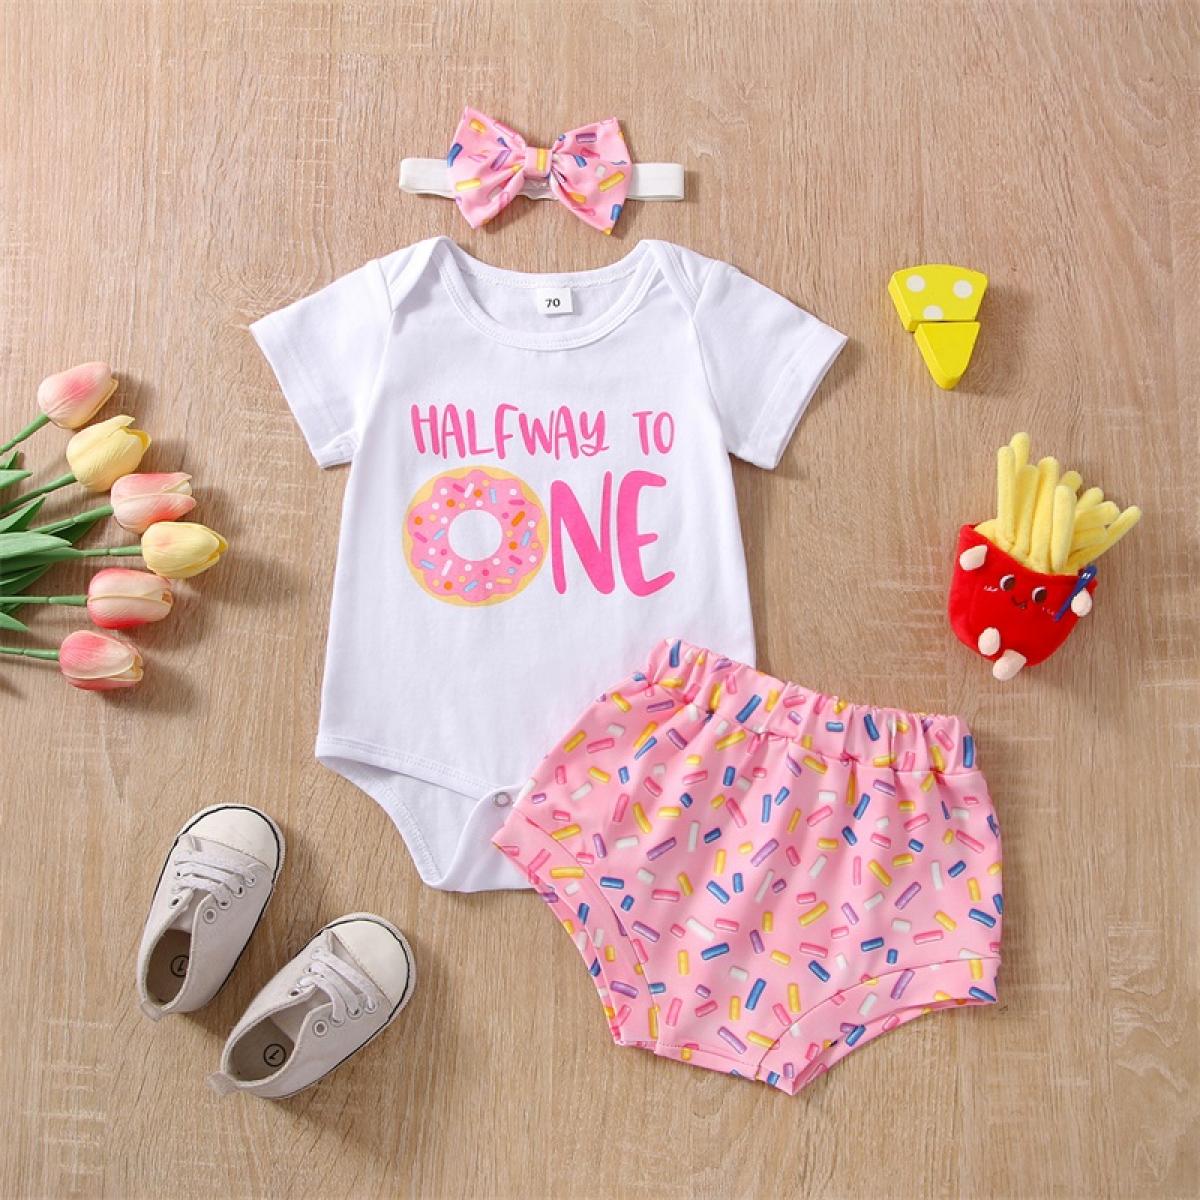 Sunsiom Baby Girls Birthday Outfit Summer Clothes Short Sleeve